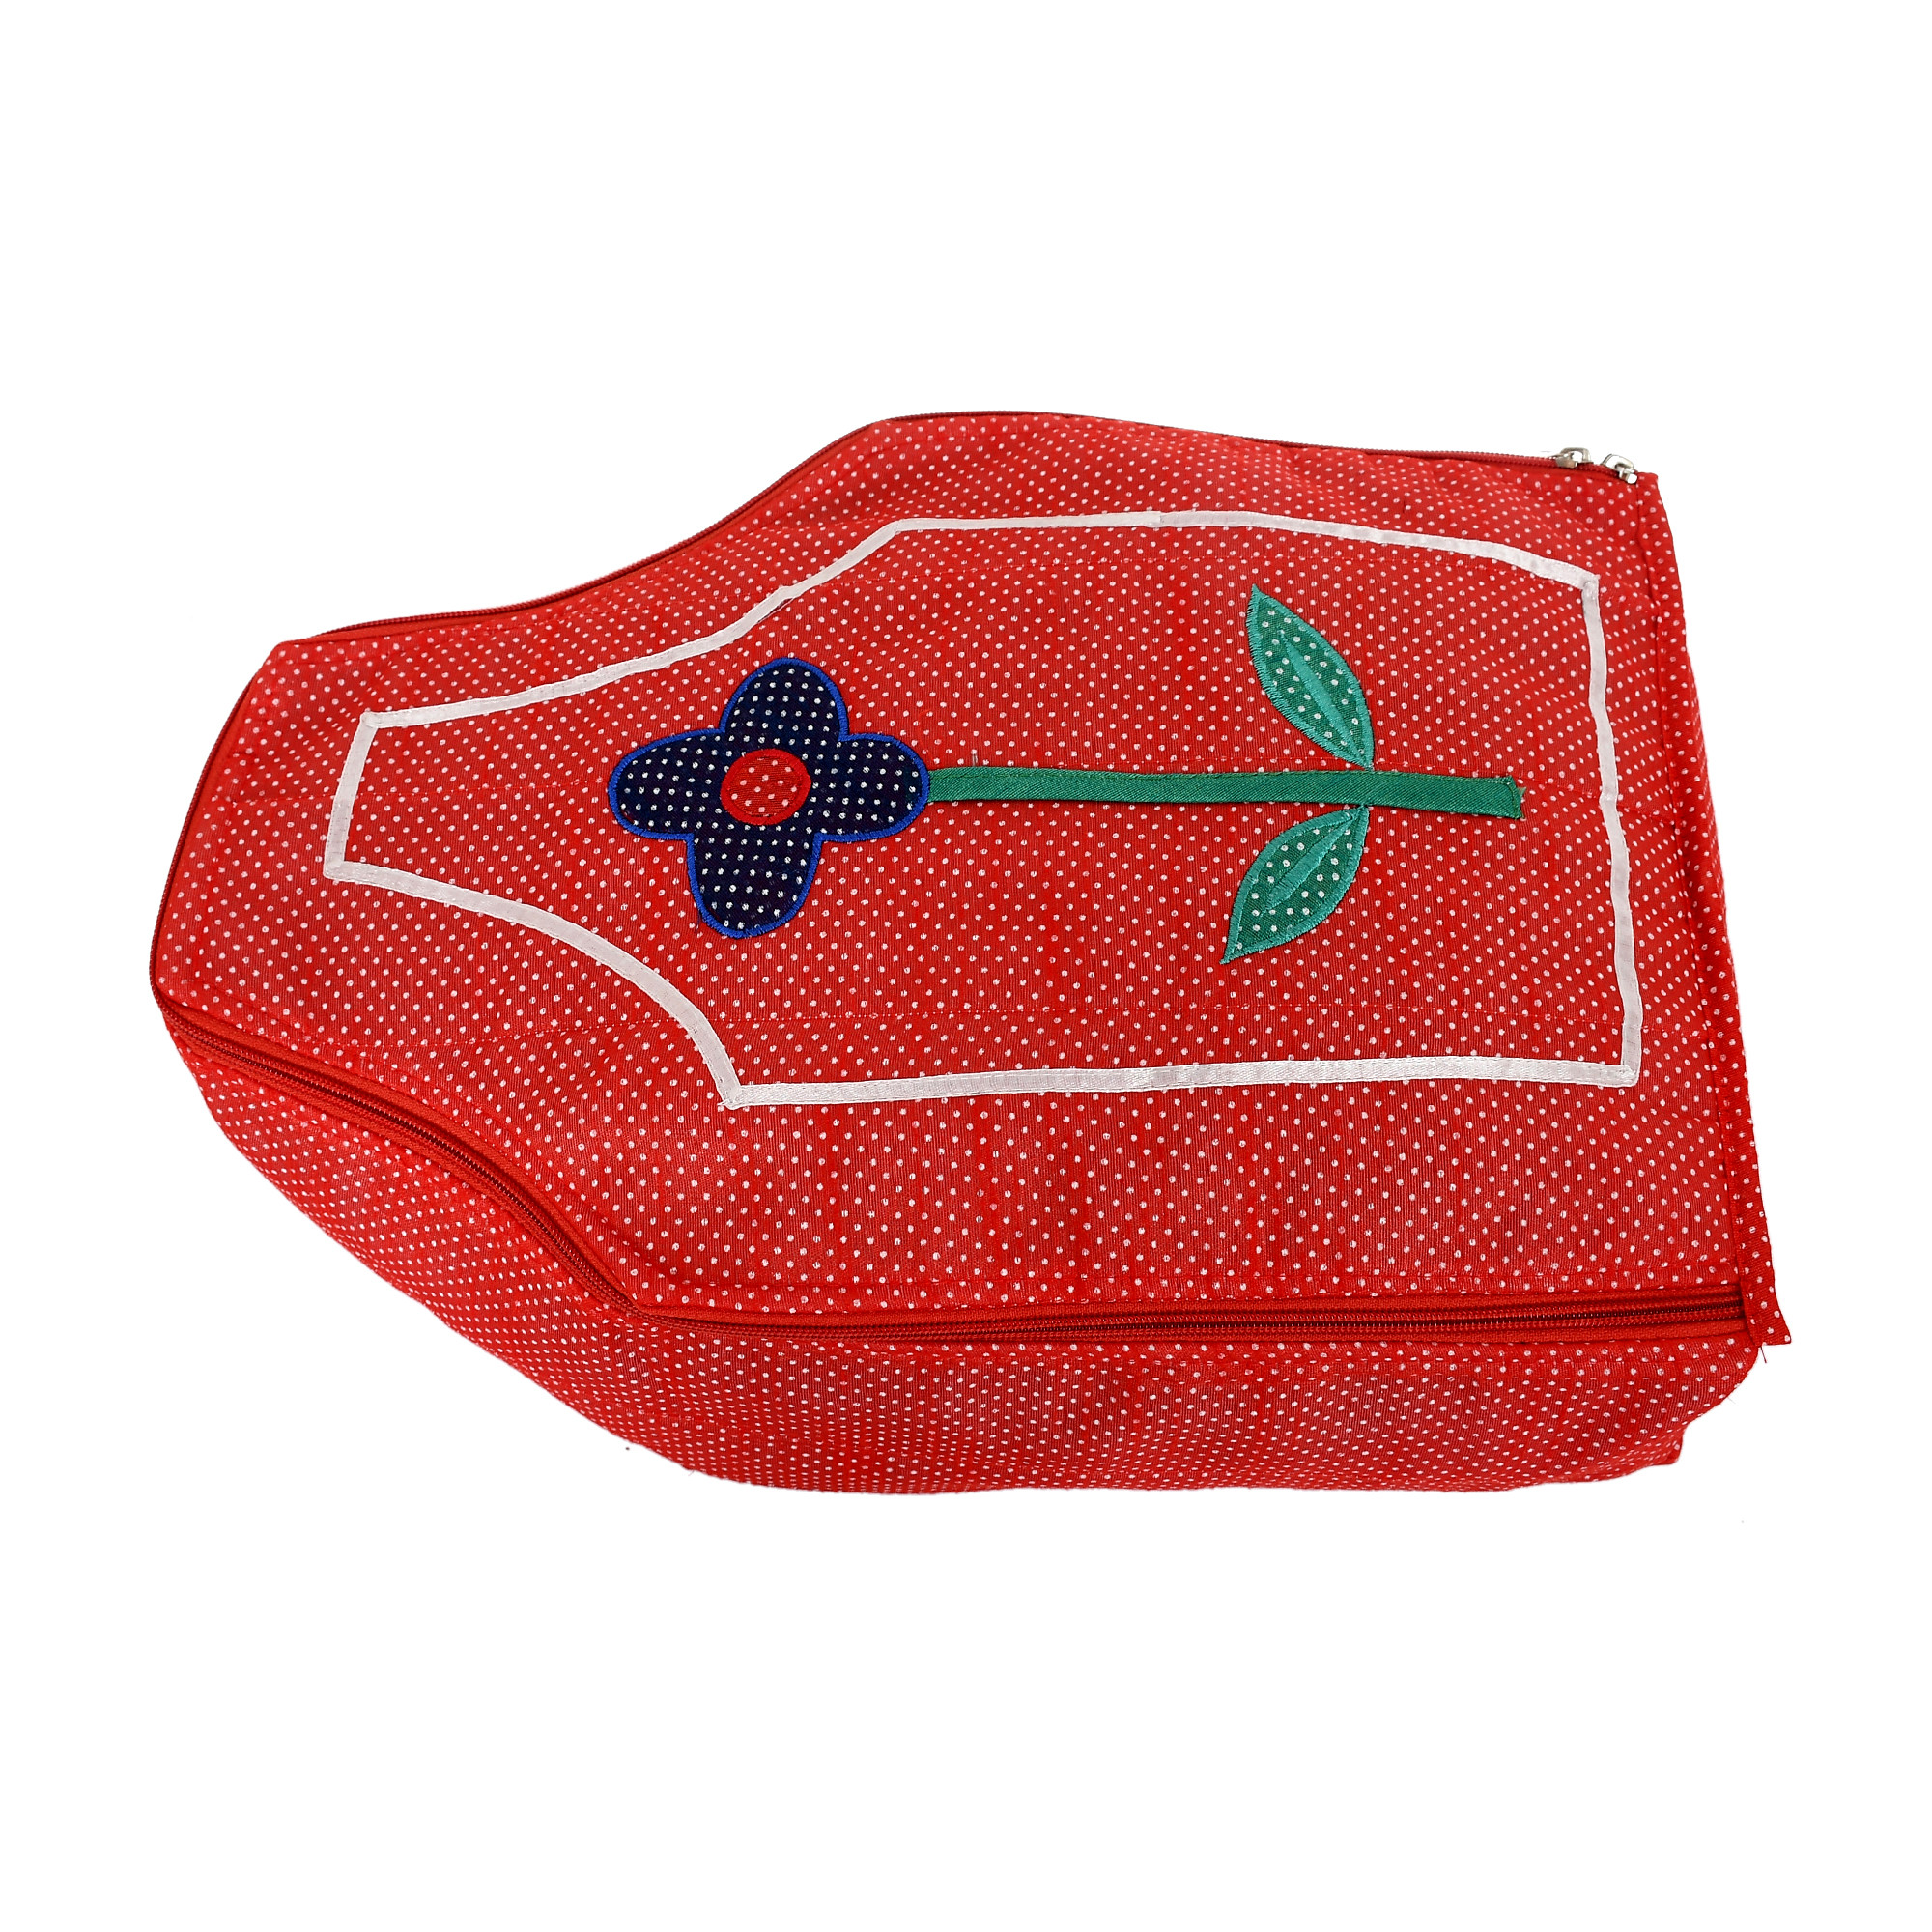 Kuber Industries Dot Printed Non Woven Blouse Cover Storage Bag, Organizers for Wardrobe (Red)